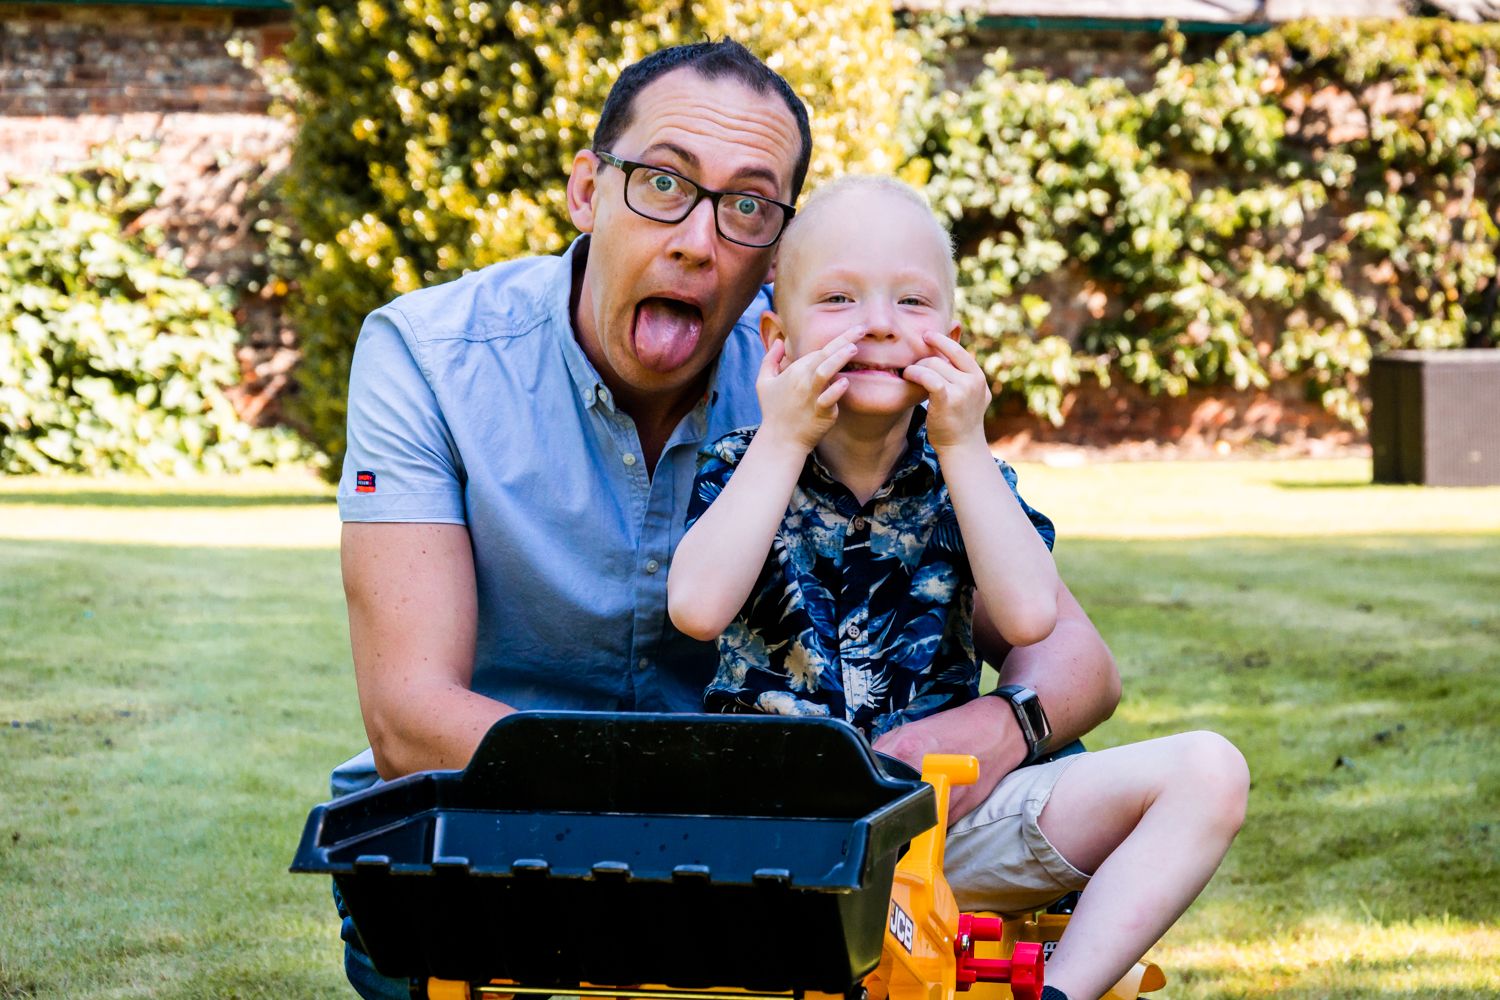 A father and son pull silly faces when they realise they are being photographed.